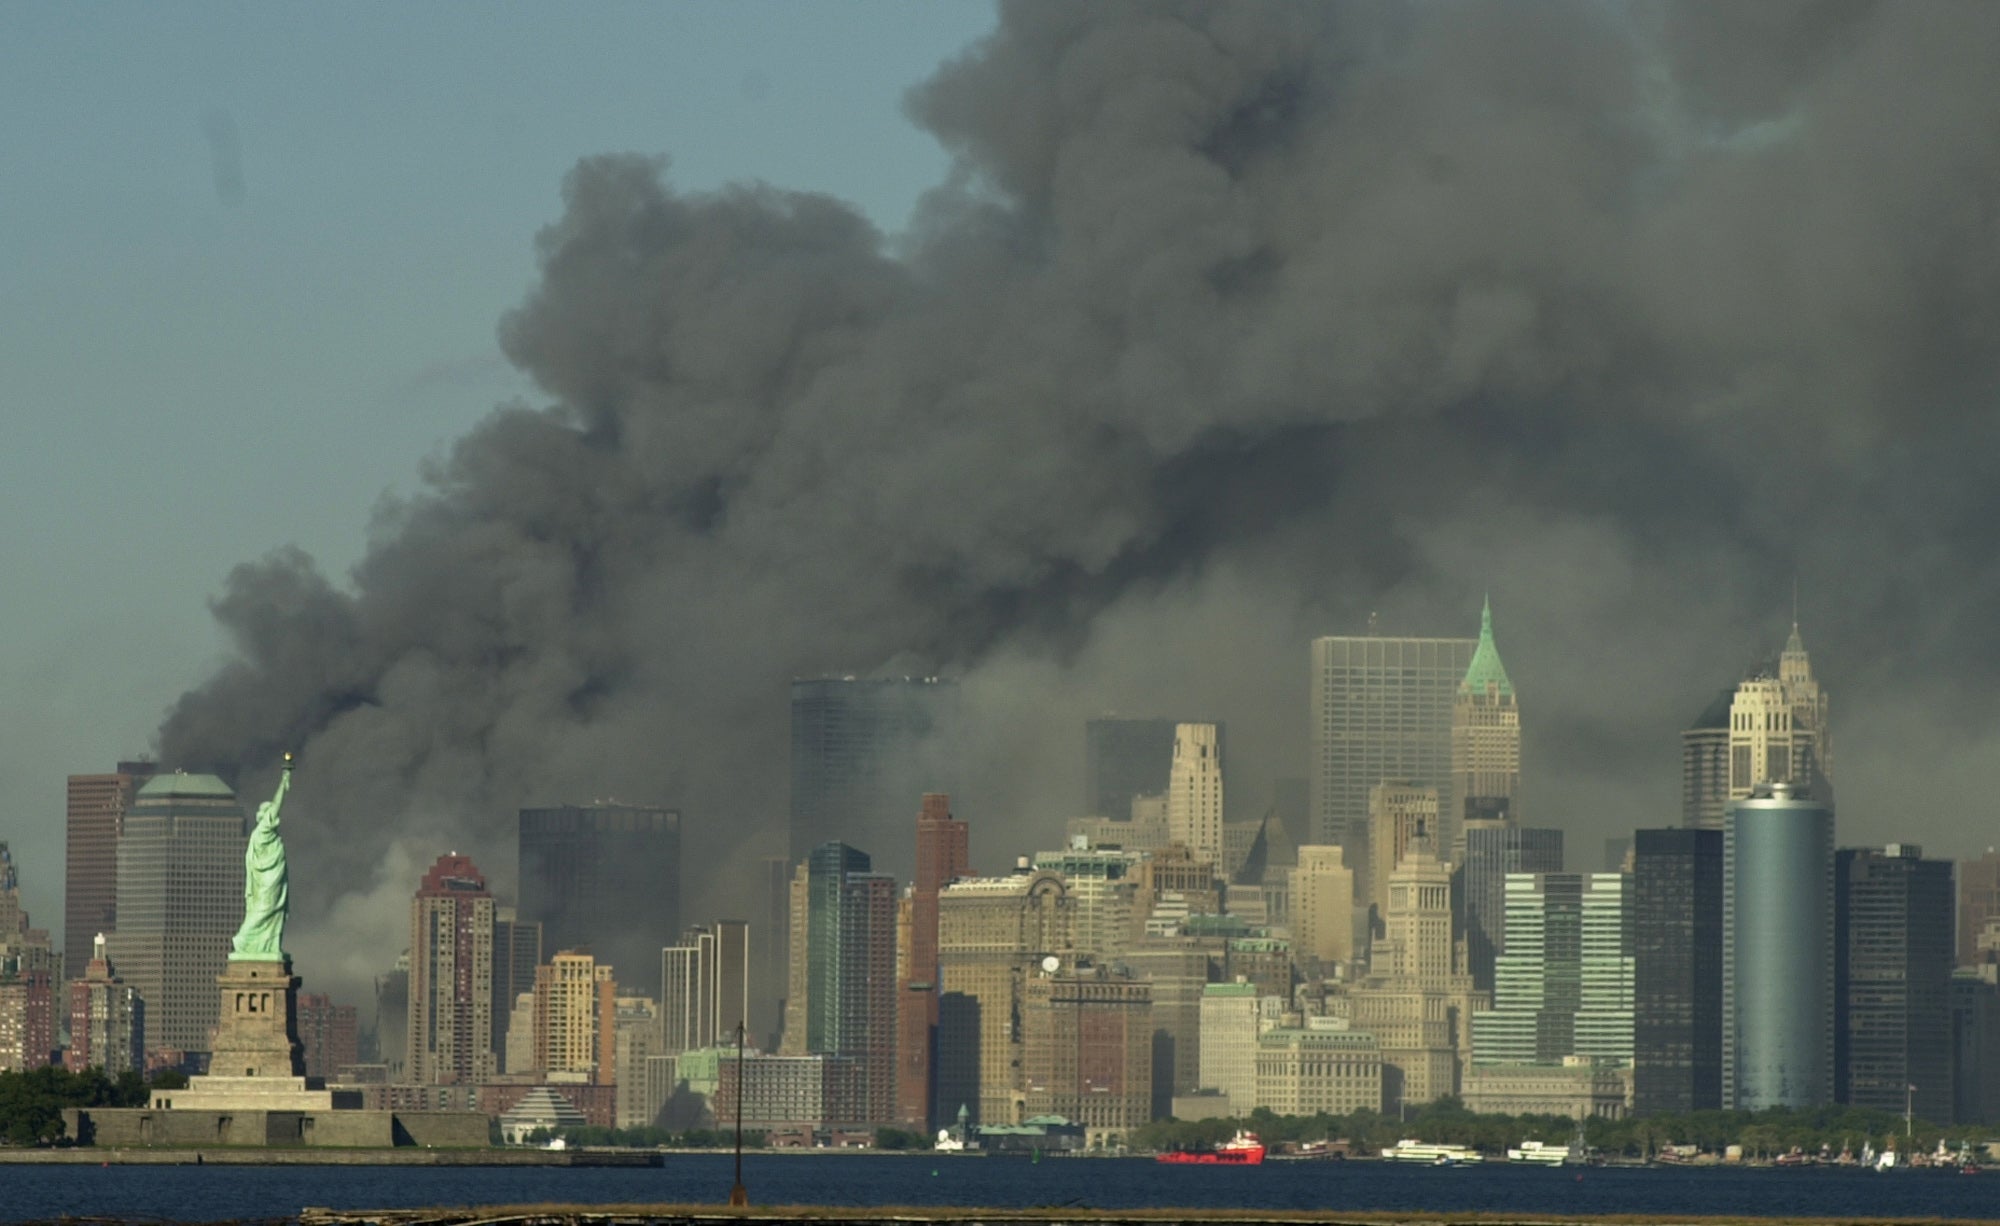 Thick smoke billows into the sky from the area behind the Statue of Liberty